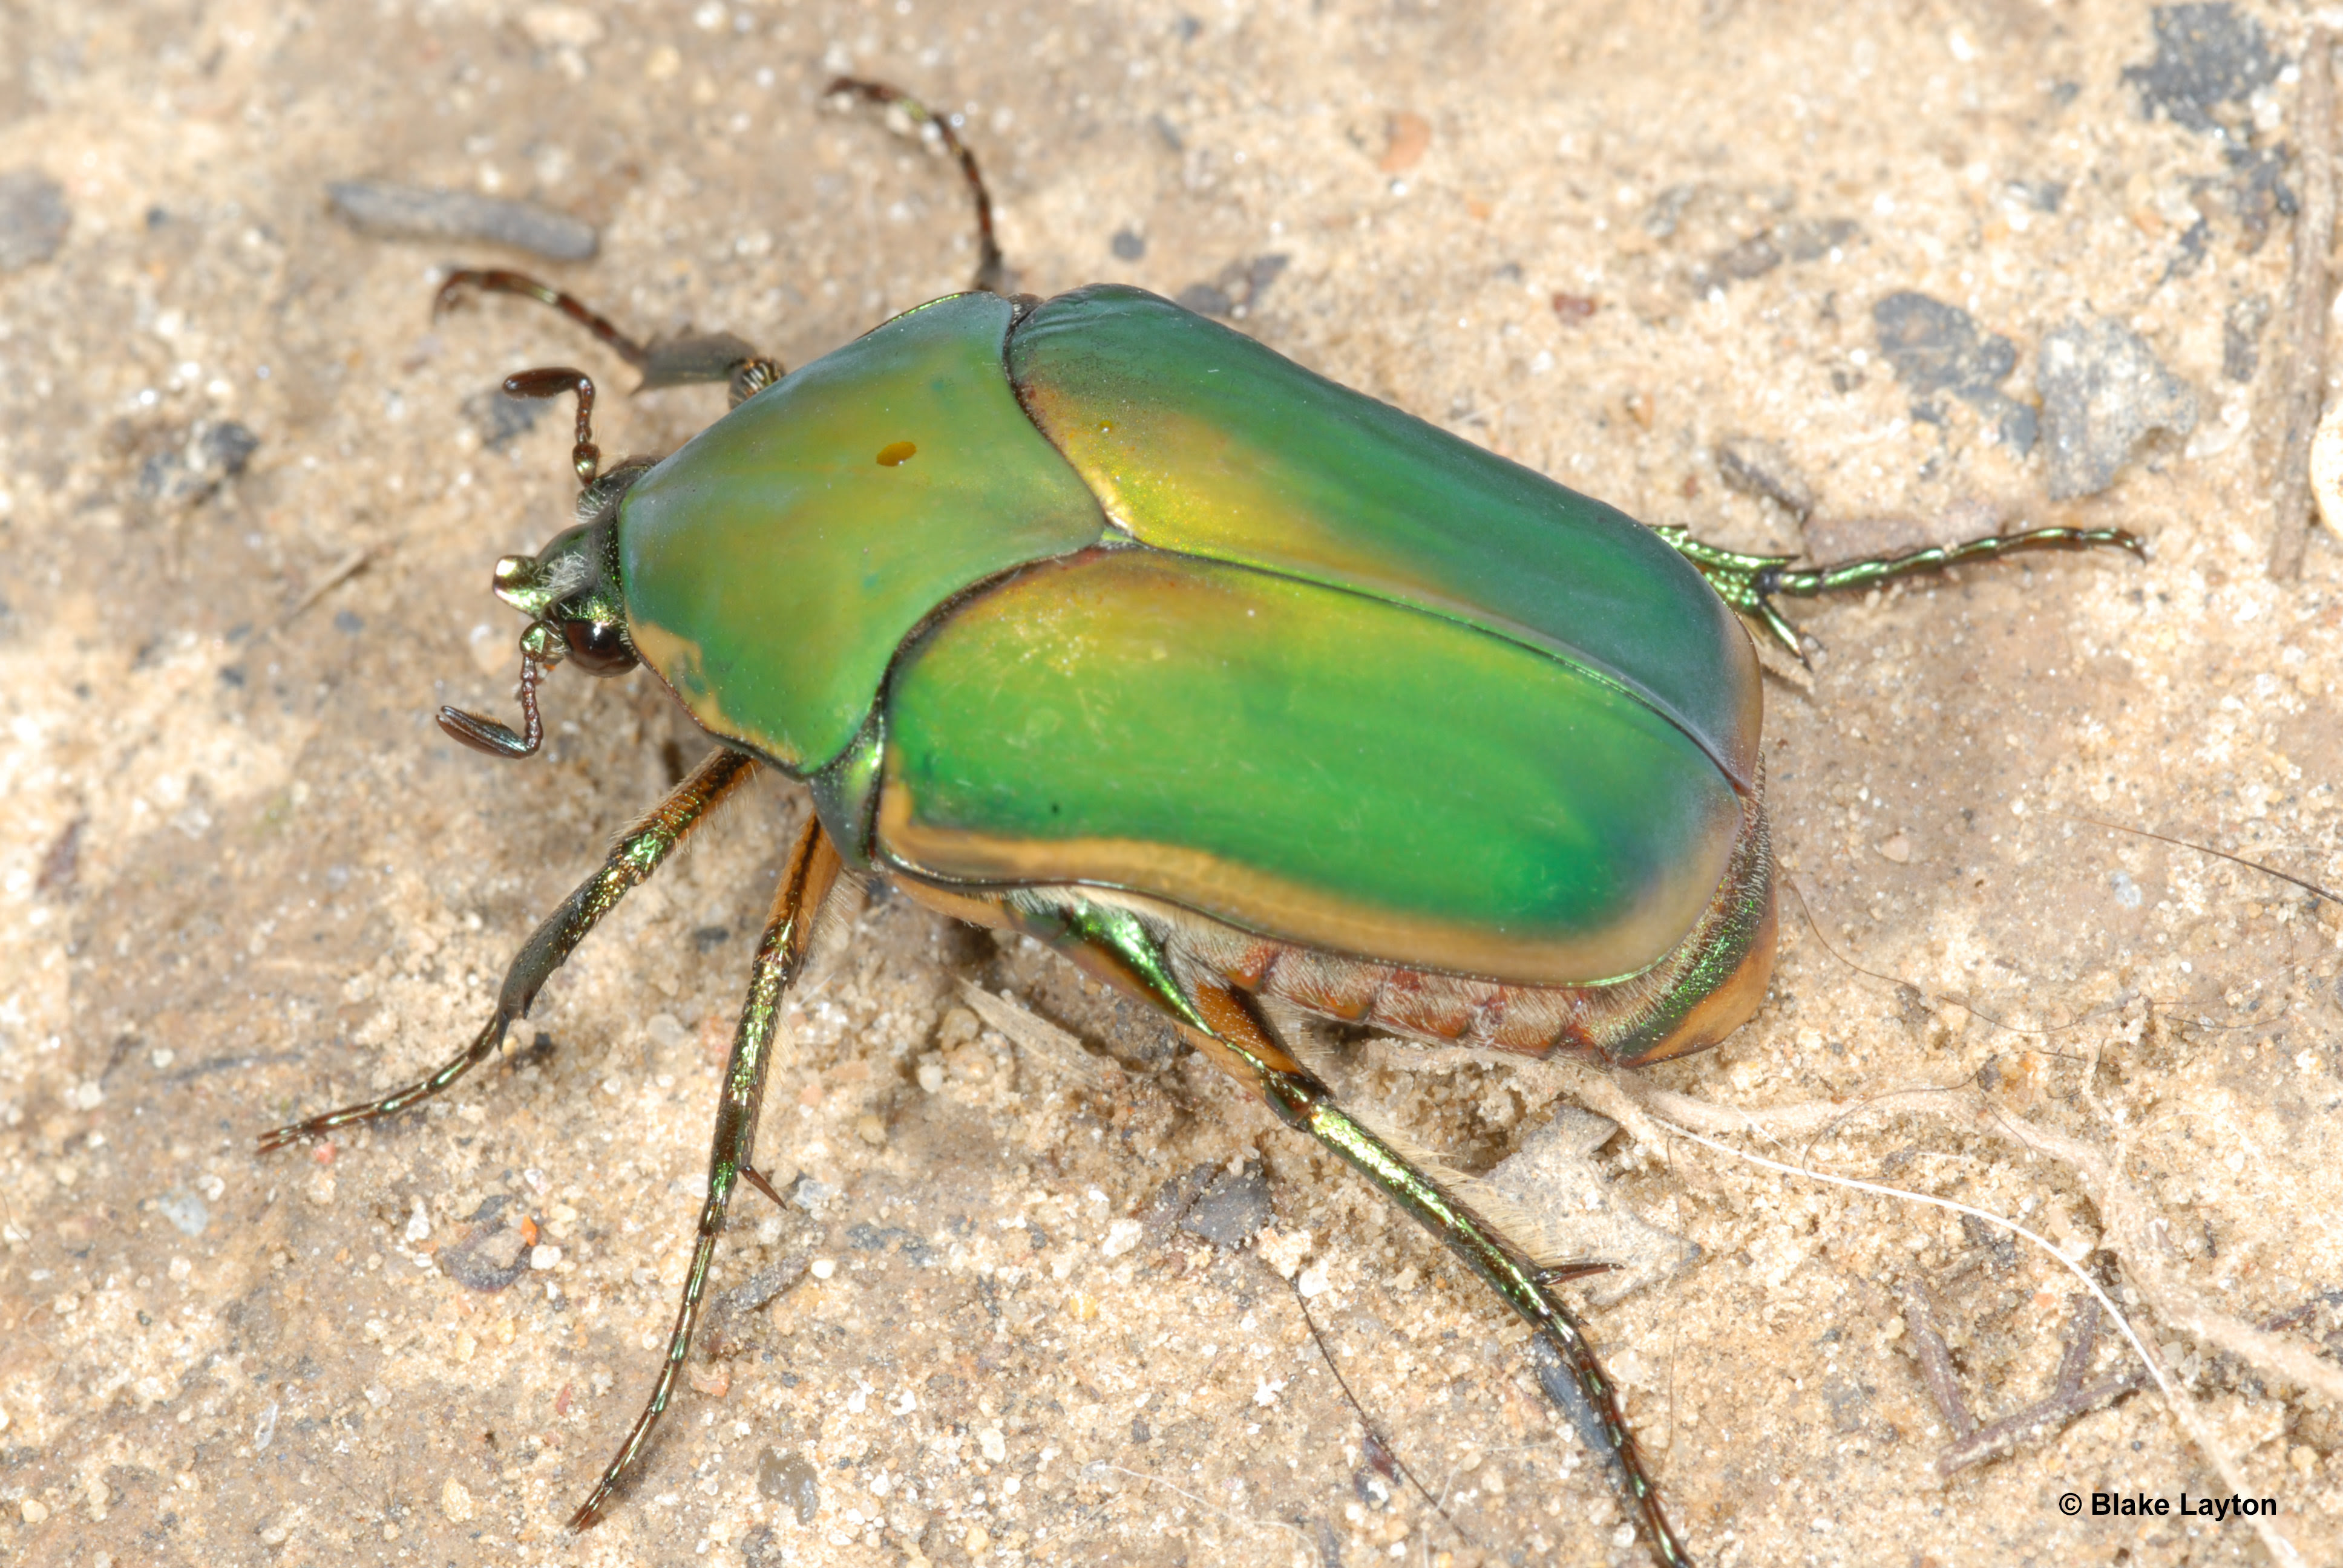 Green iridescent beetle with six legs.